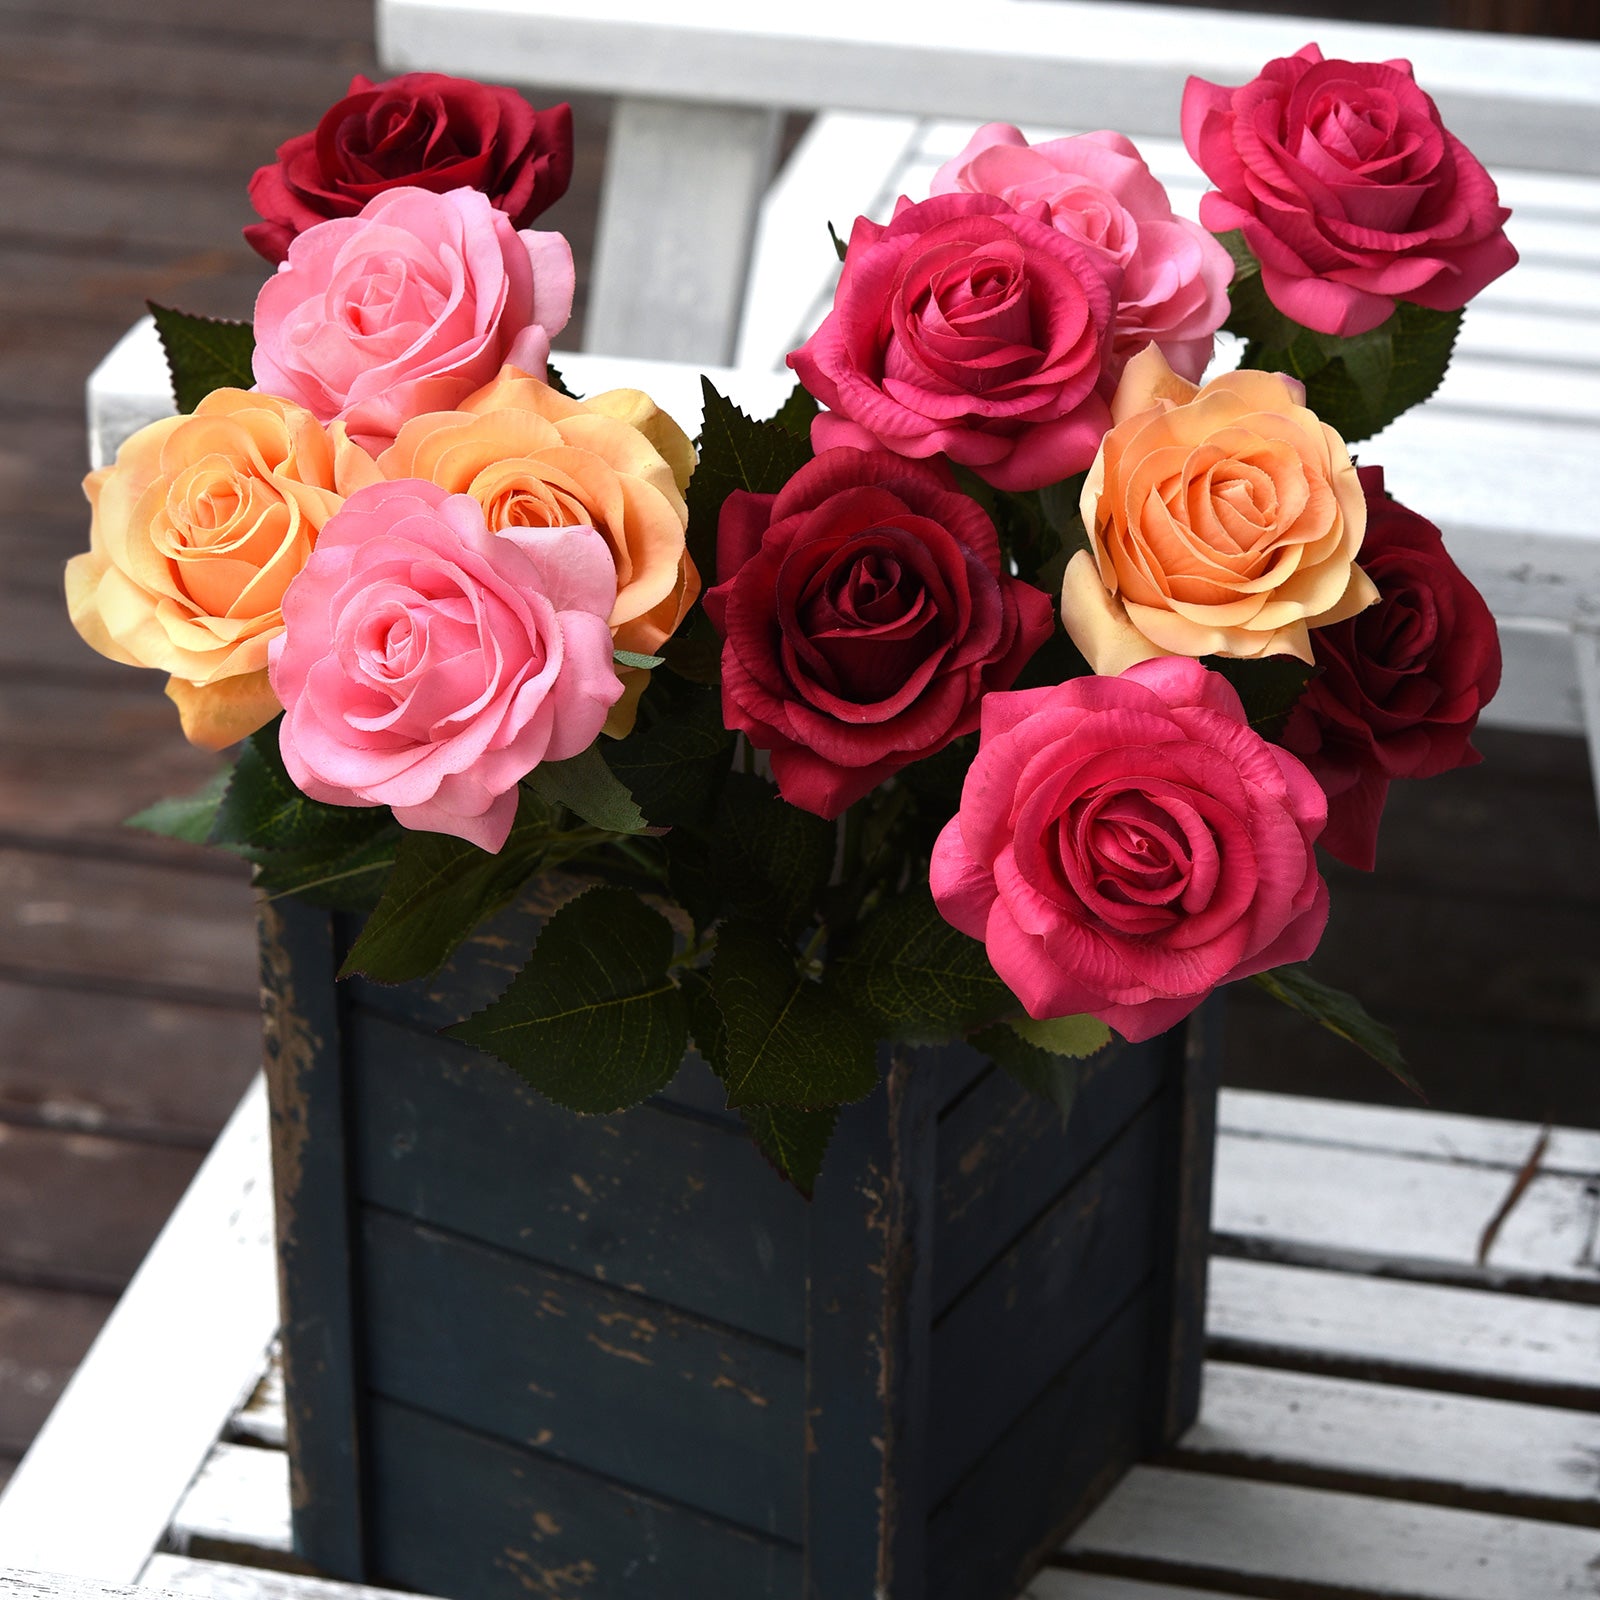 Real Touch 12 Stems "Gracious Medley" Mix Color Silk Artificial Roses Flowers ‘Petals Feel and Look like Fresh Roses'